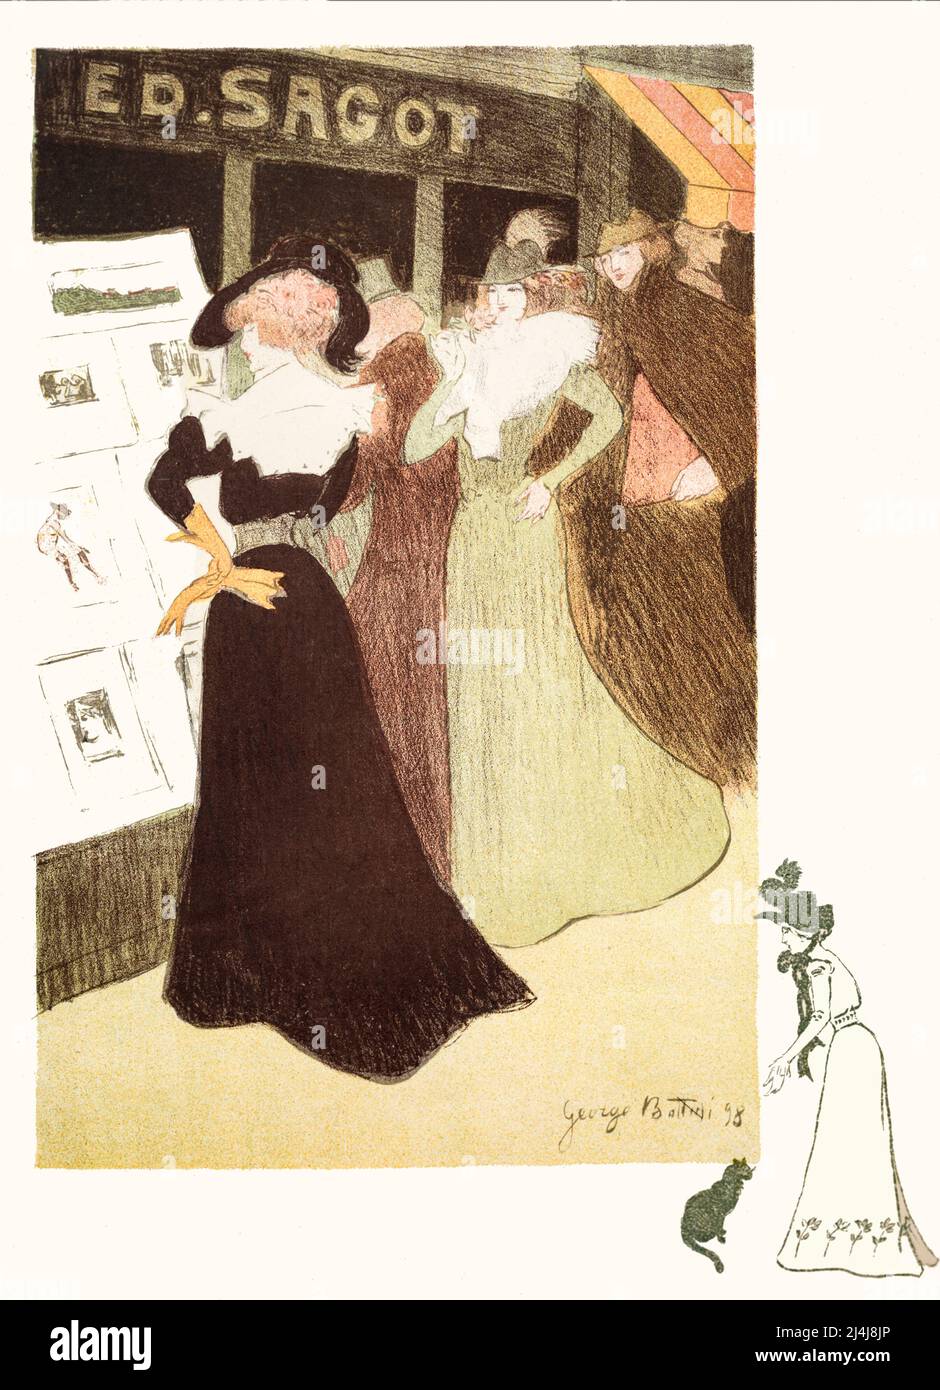 A late 19th century French advertising poster showing a crowd of fashionably dressed young women gather before the windows of Edmond Sagot's shop, suggesting the growing status of color lithography at the time. The artist is Georges Bottini (1874 - 1907) Stock Photo